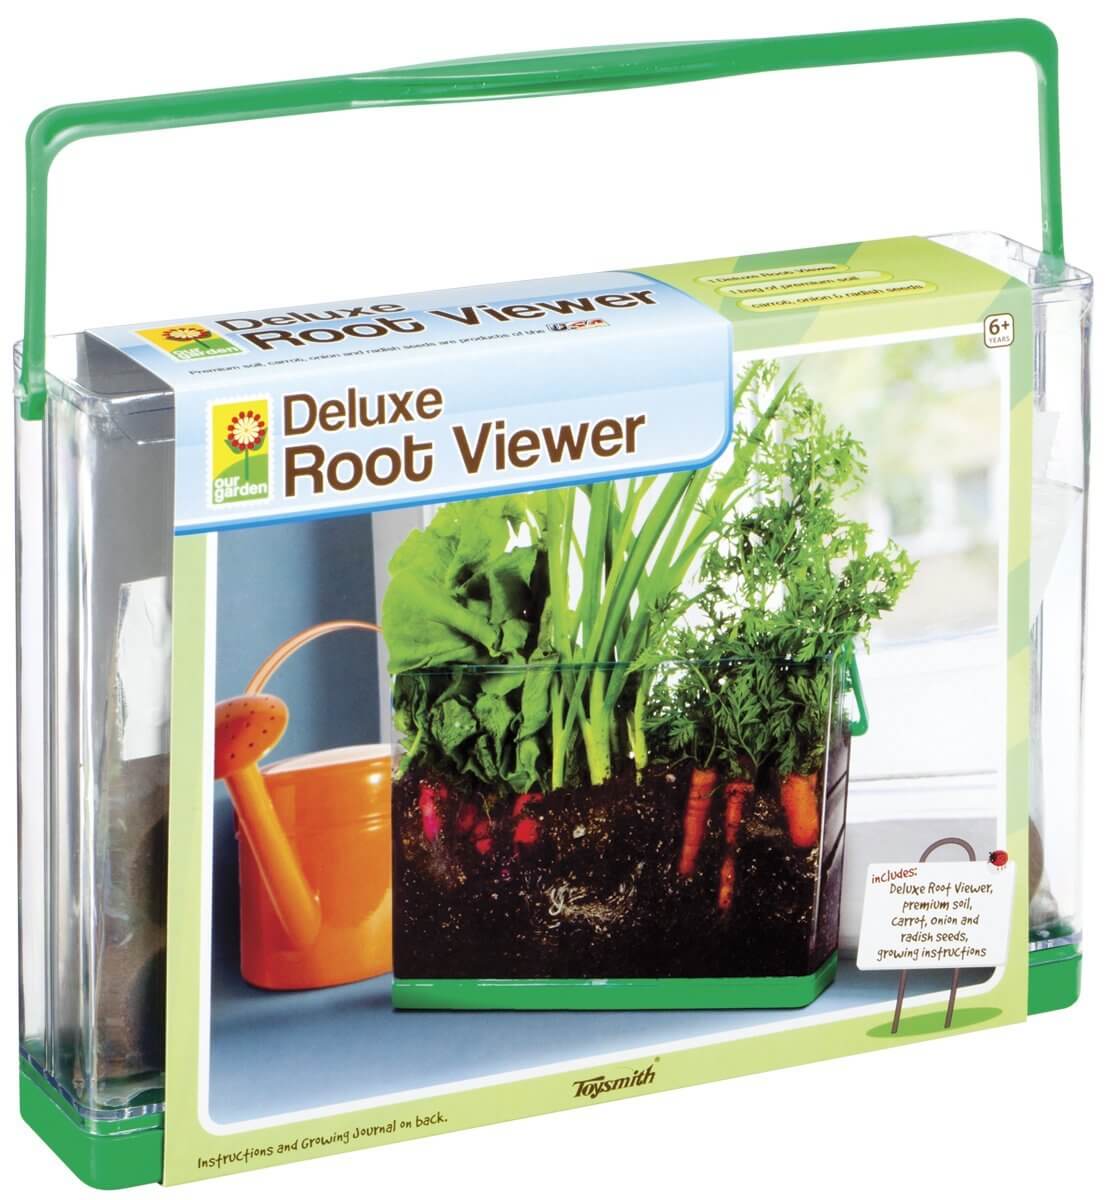 Toysmith Deluxe Root Viewer